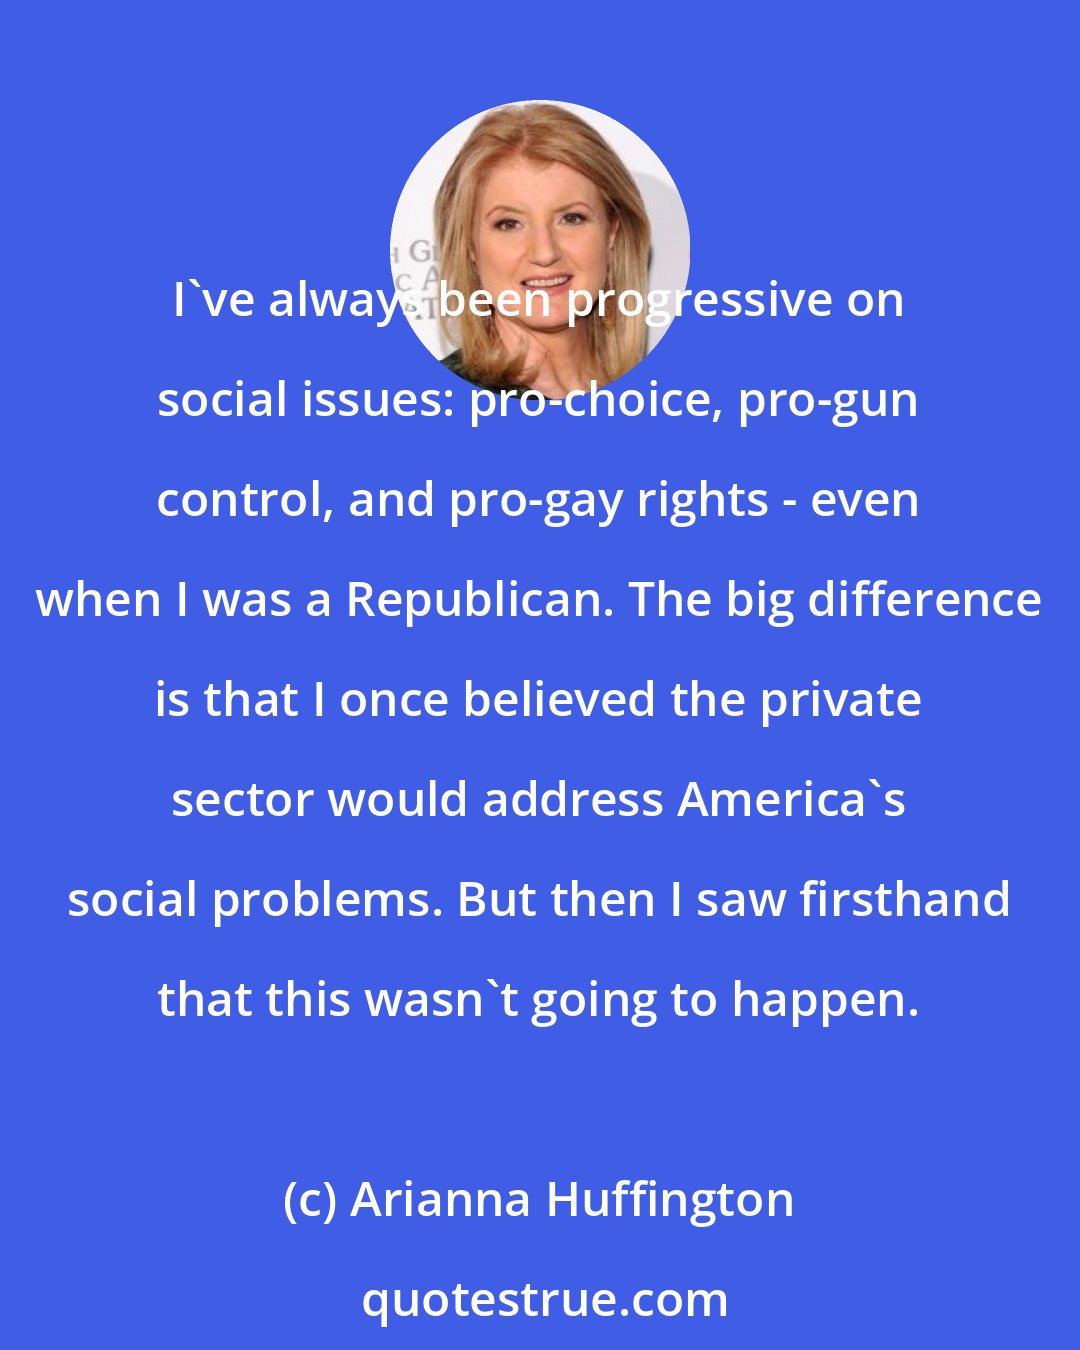 Arianna Huffington: I've always been progressive on social issues: pro-choice, pro-gun control, and pro-gay rights - even when I was a Republican. The big difference is that I once believed the private sector would address America's social problems. But then I saw firsthand that this wasn't going to happen.